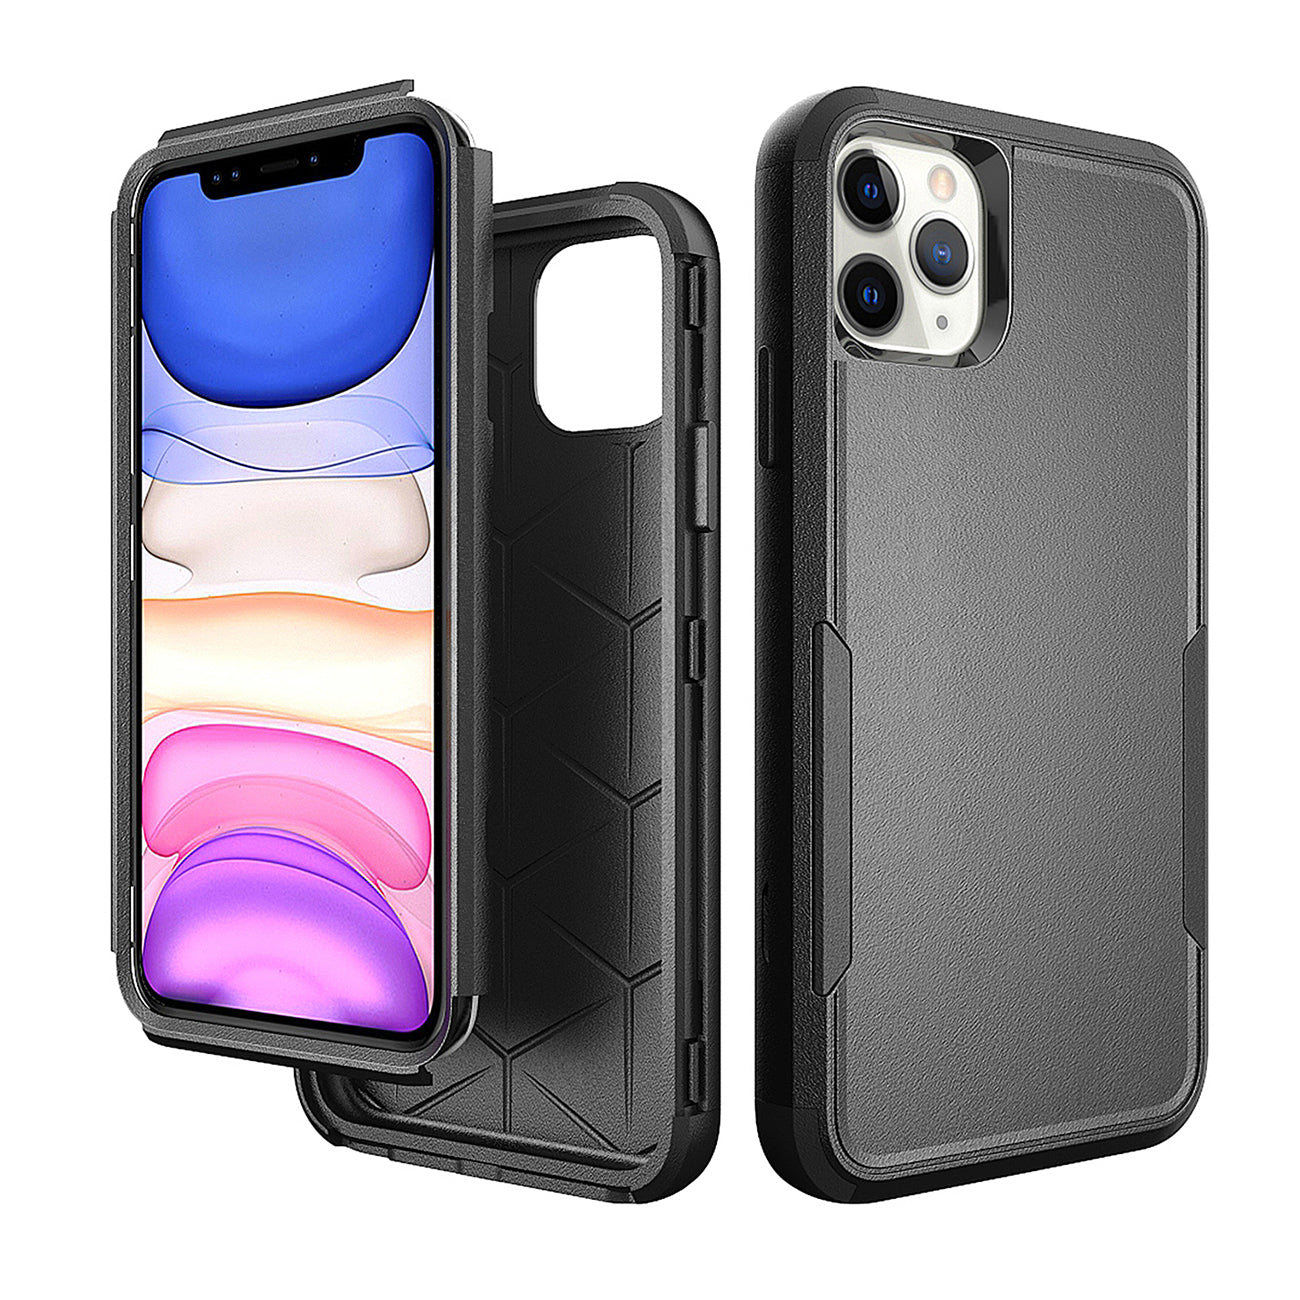 3in1 Hybrid Heavy Duty Defender Rugged Armor Case For APPLE IPHONE 11 PRO MAX In Black